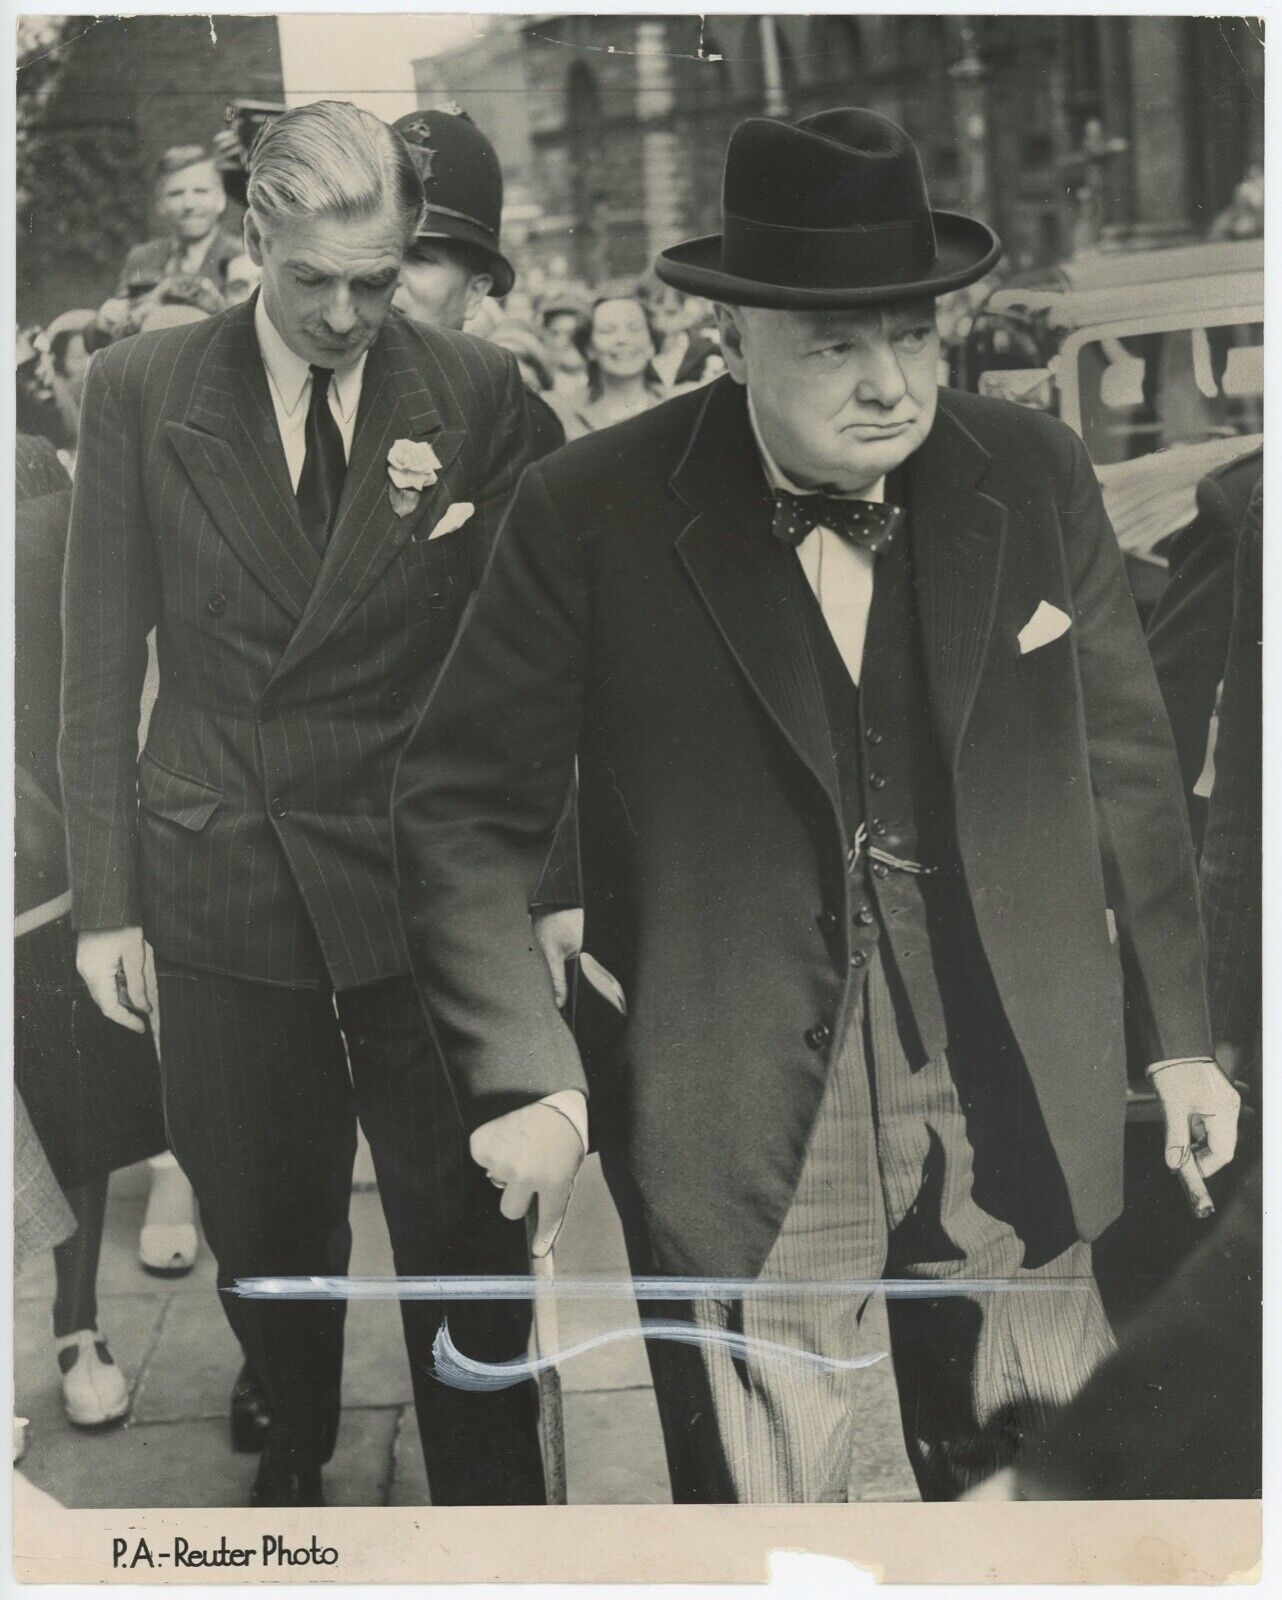 16 August 1950 press photo of Churchill and Eden going to visit Clement Attlee